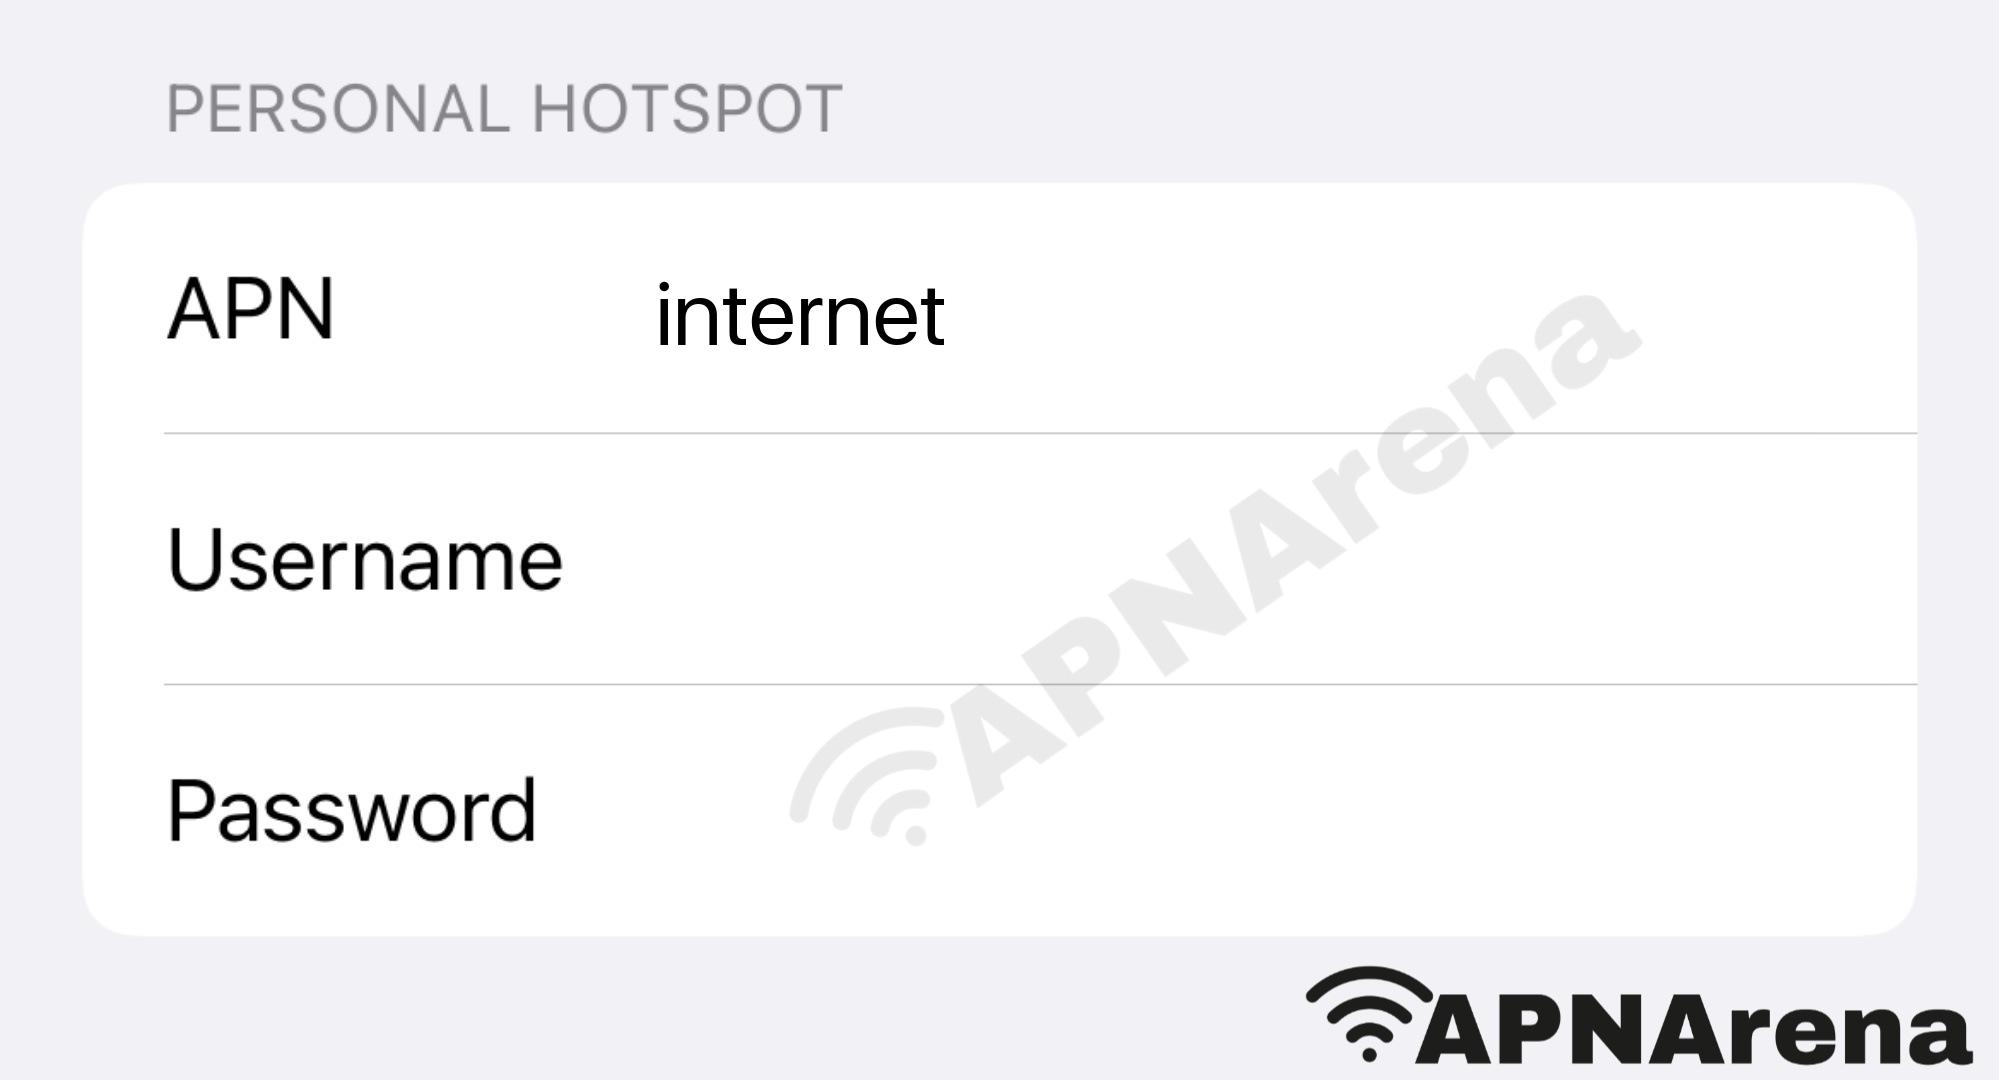 Vodafone Germany (D2 Mannesmann) Personal Hotspot Settings for iPhone